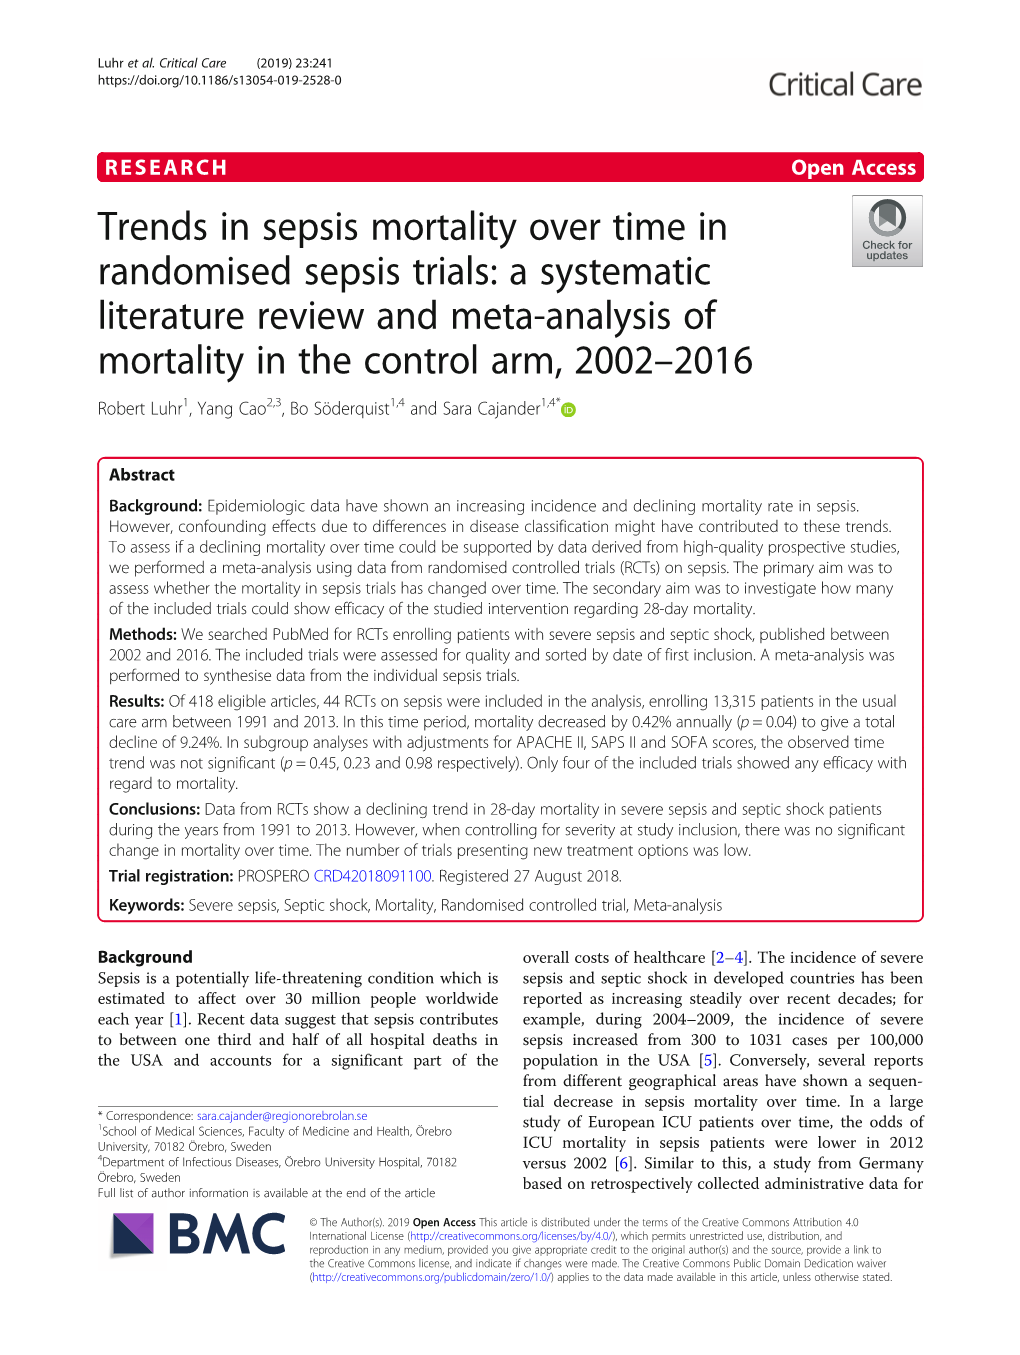 Trends in Sepsis Mortality Over Time in Randomised Sepsis Trials